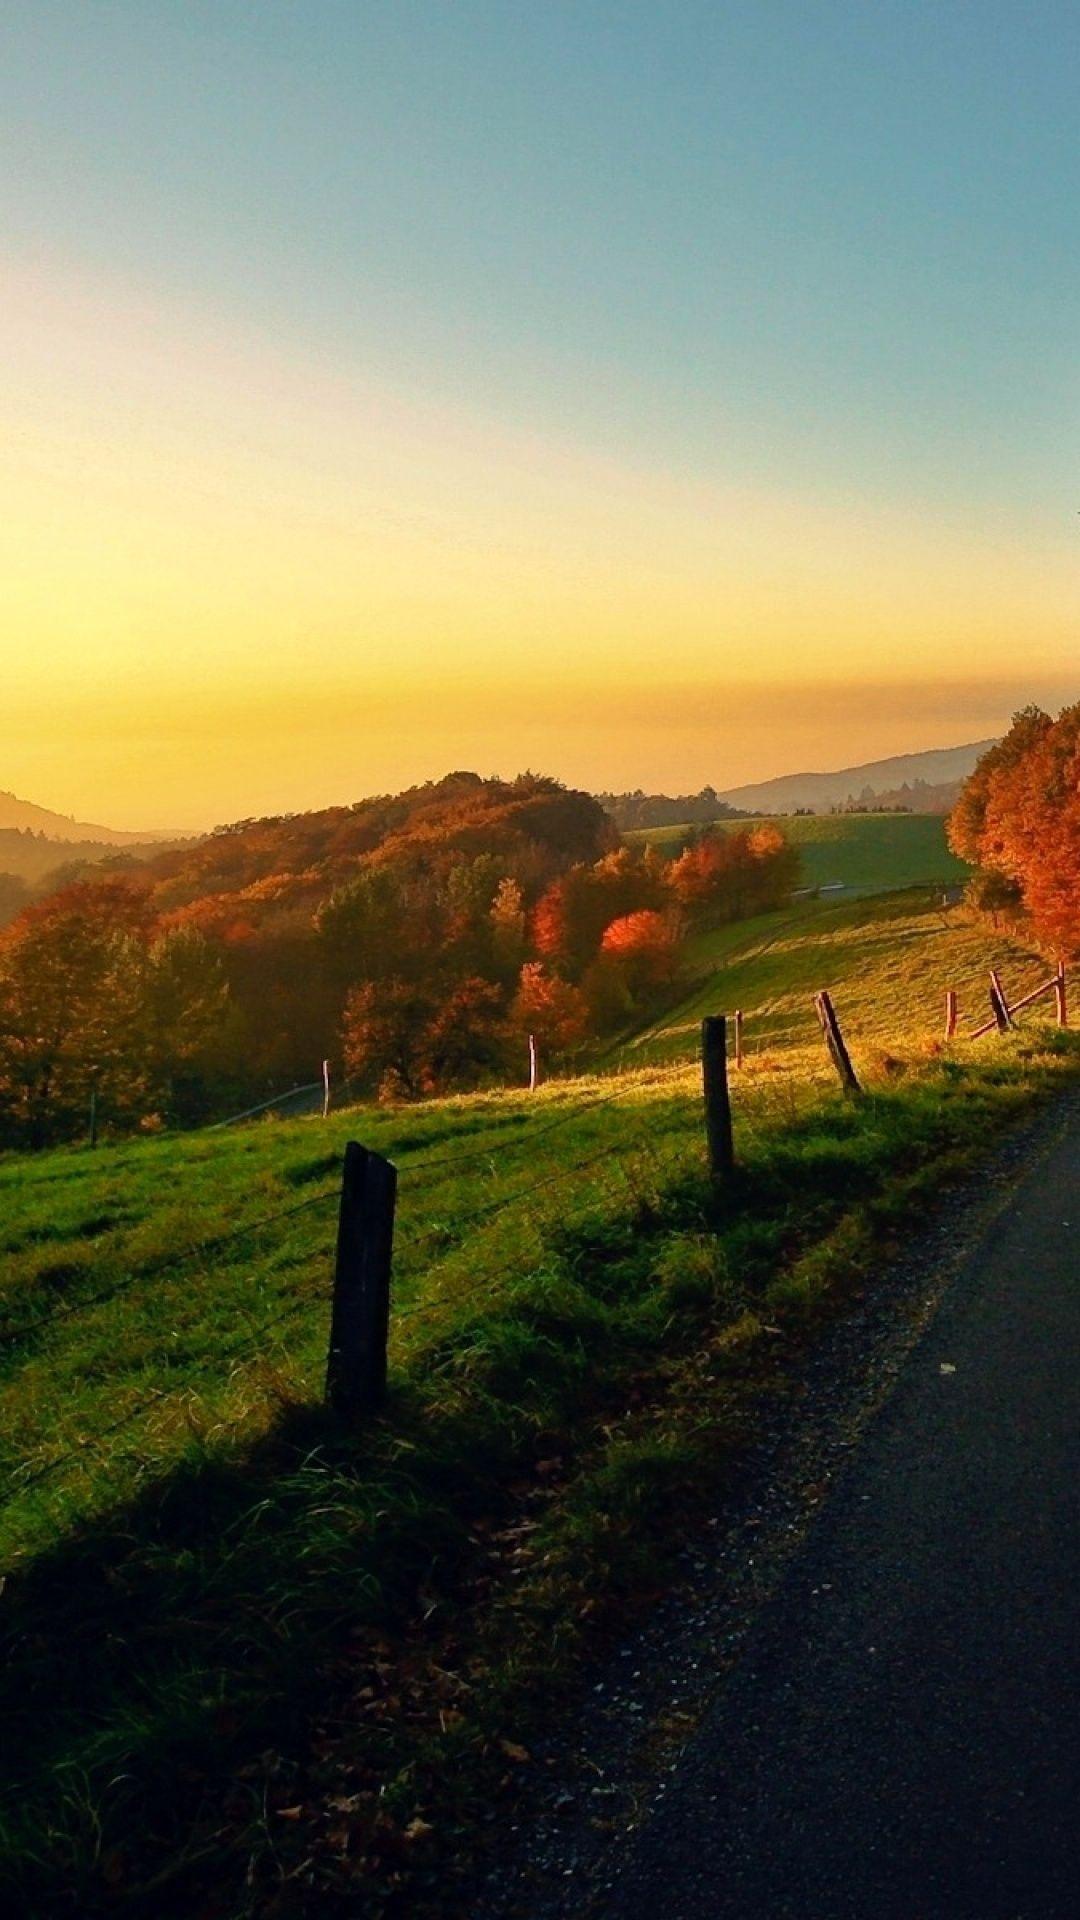 Countryside Autumn Landscape Android Wallpaper. Background